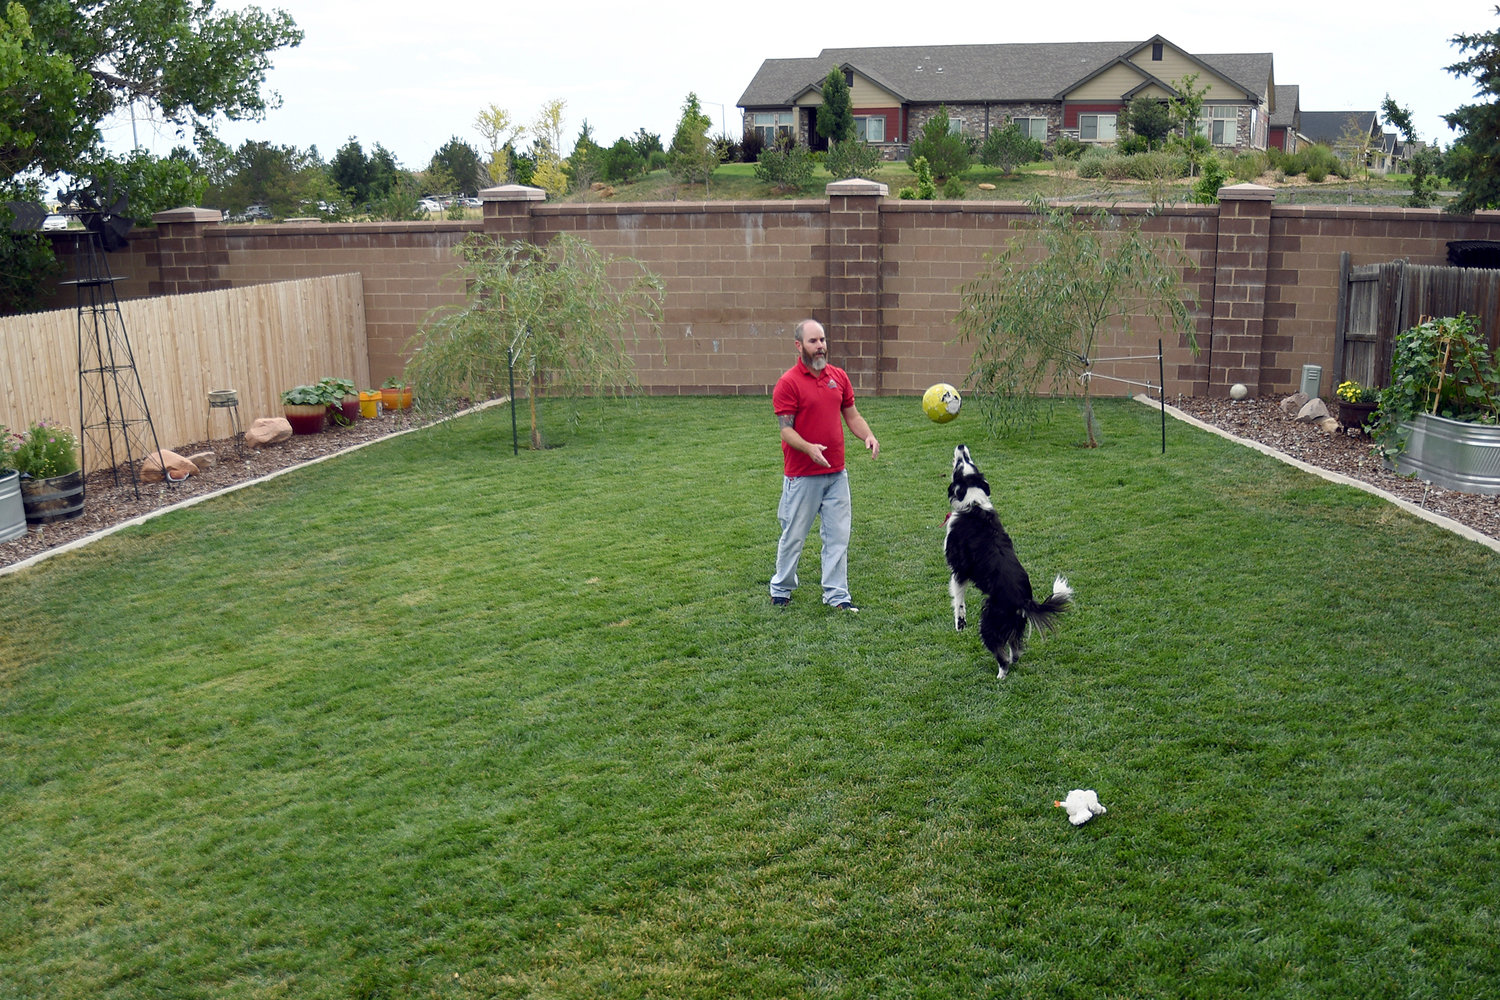 Kyle Tomcak plays with one of his dogs in the backyard of his house in Aurora, Colo., on Monday, July 18, 2022. Tomcak was in the market for a home priced around $450,000 for his in-laws and he and his wife bid on every house they toured, regardless of whether they fell in love with the home. He said his search became increasingly dispiriting as he not only lost out to investors fronting cash offers $100,000 over asking price but as mortgage rates started to balloon. He has since pulled out of the housing search. (AP Photo/Thomas Peipert)